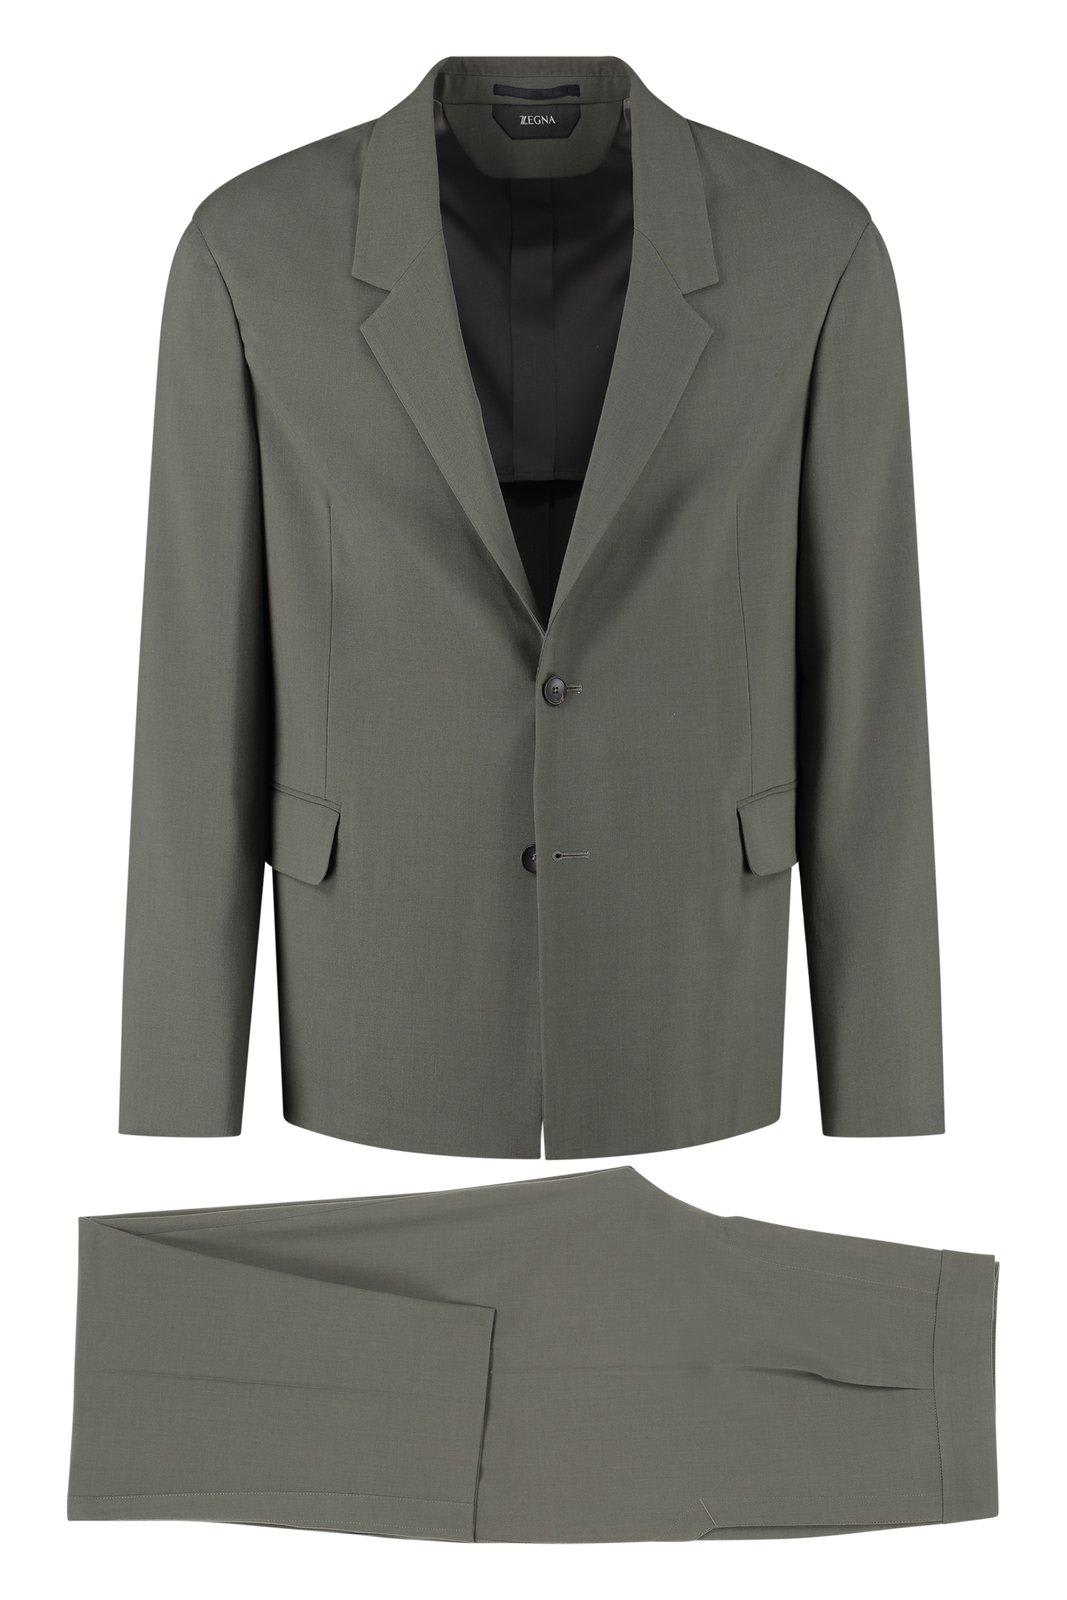 Z Zegna Two-piece Suit In Green